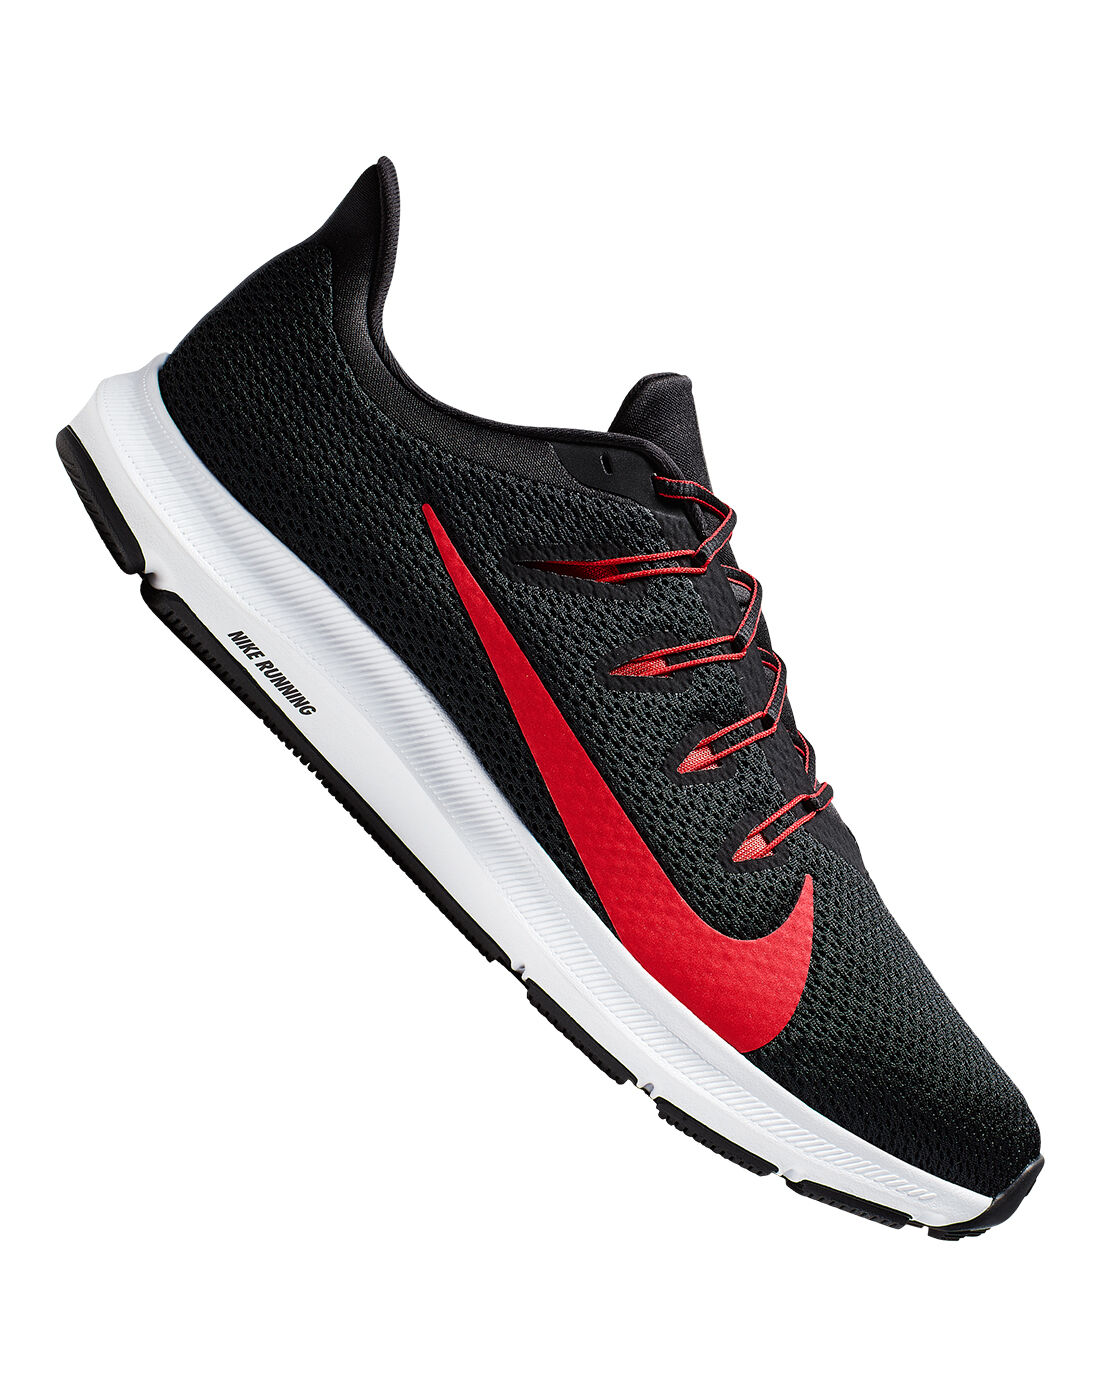 Black \u0026 Red Nike Quest Running Shoes 